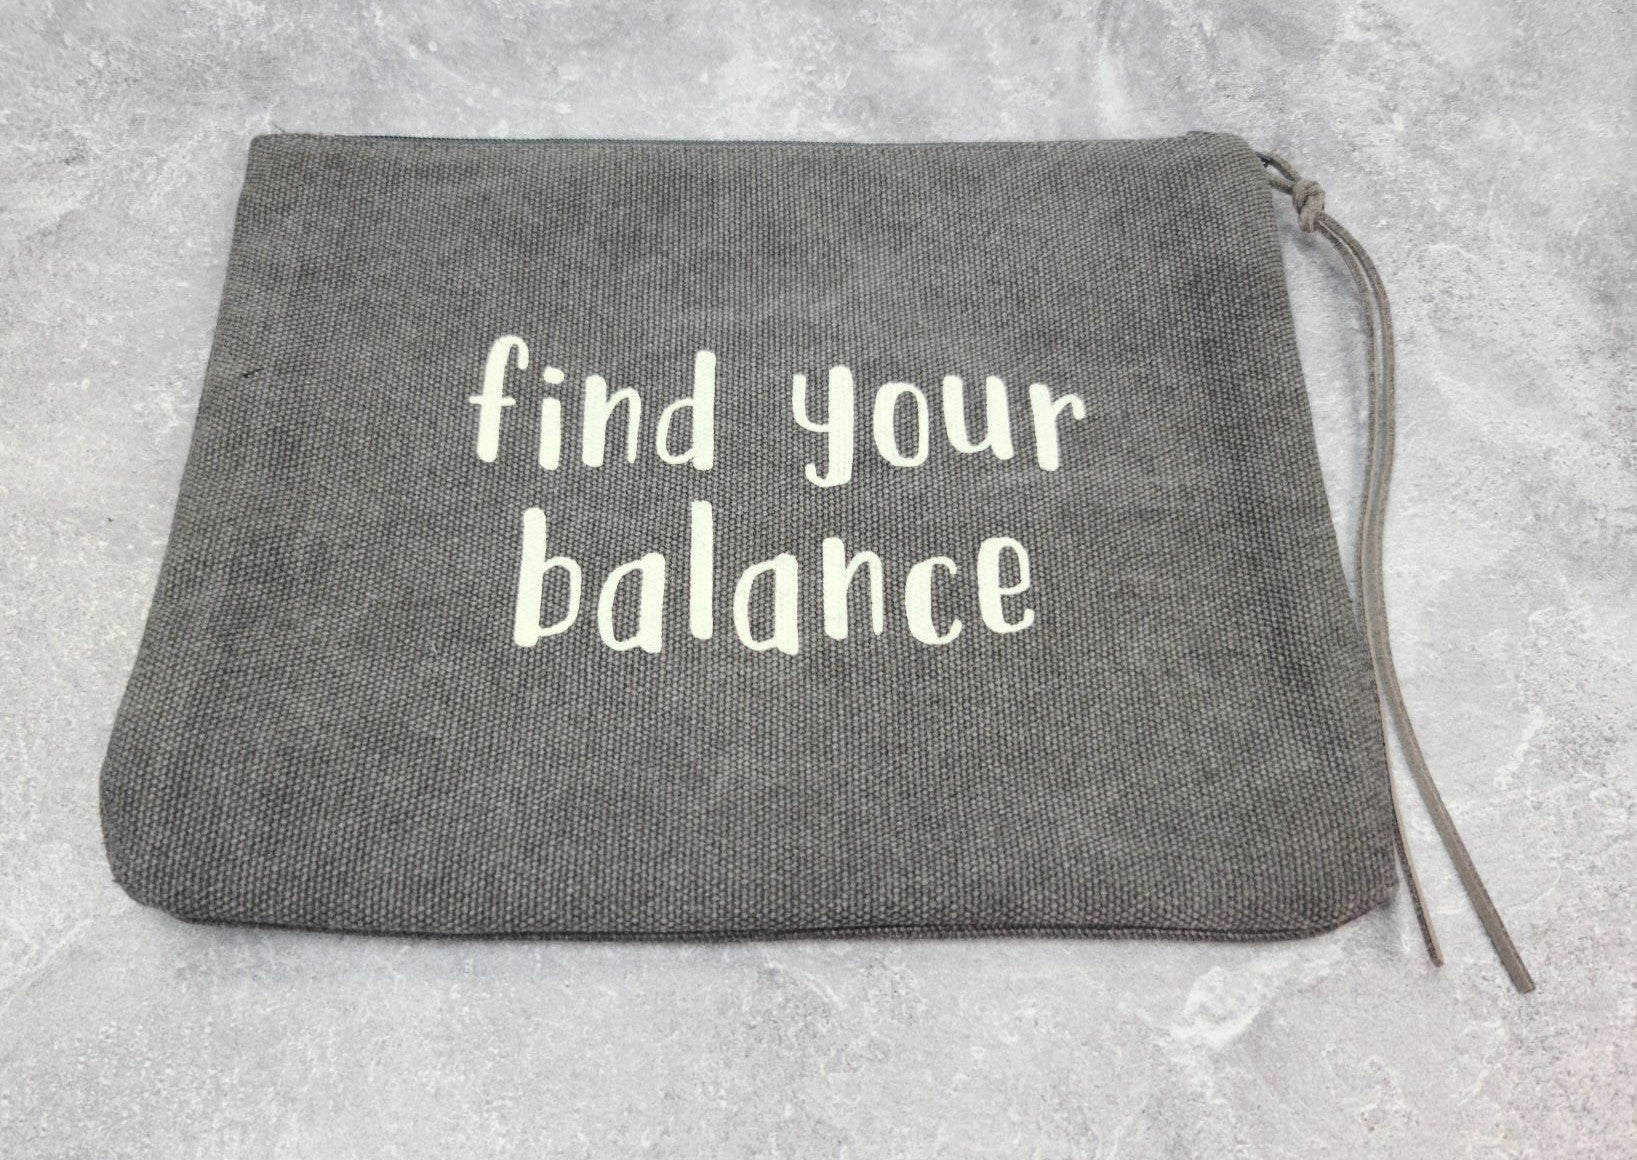 Find Your Balance Canvas Zipper Pouch Grey